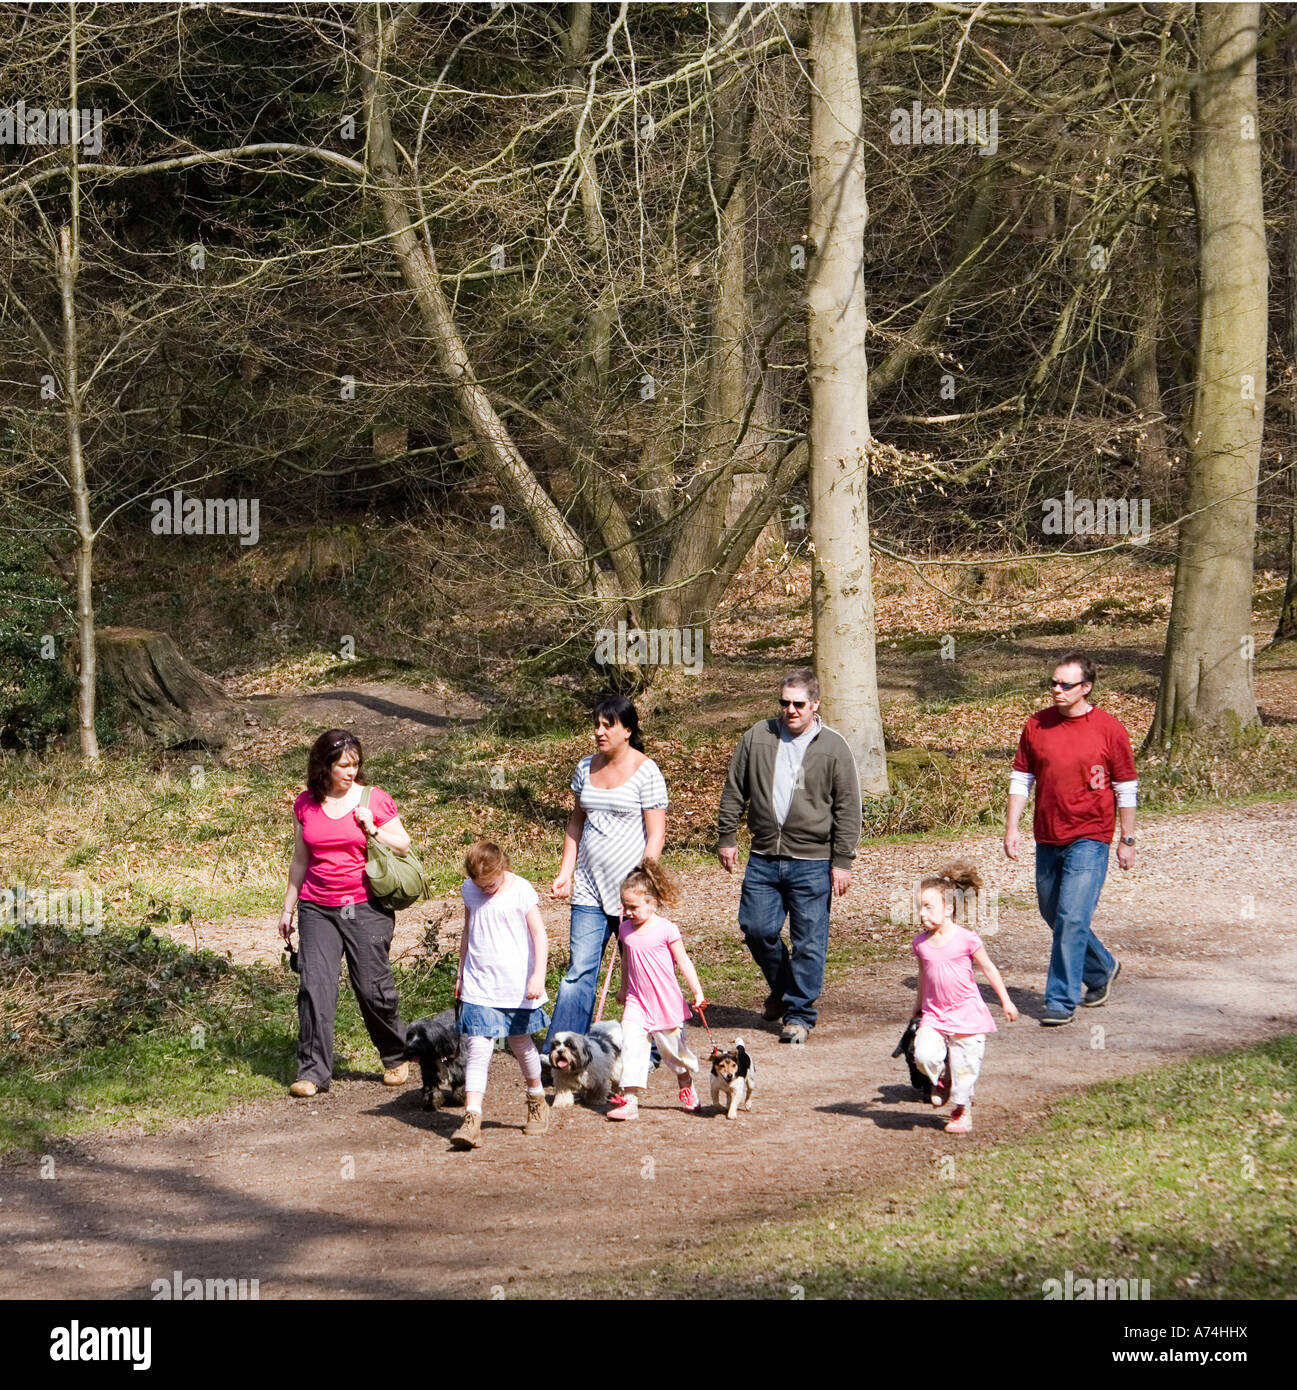 Family with young children and dogs walking in woods on forestry track Forest of Dean England UK Stock Photo